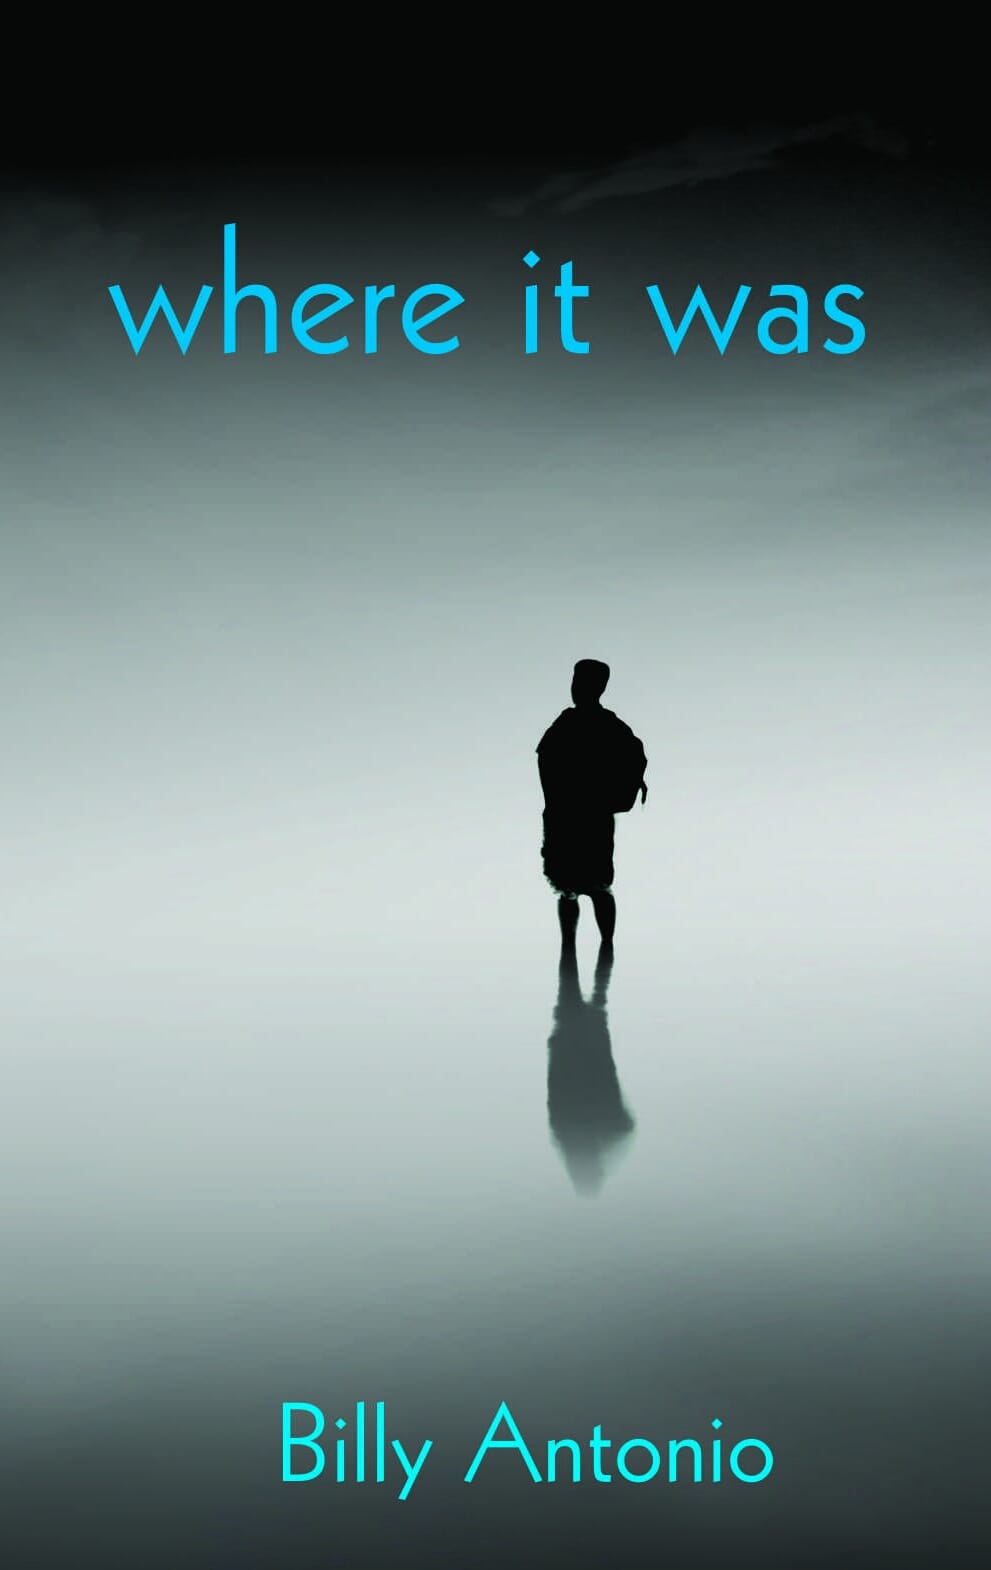 where it was (Clare Songbirds Publishing House, New York)